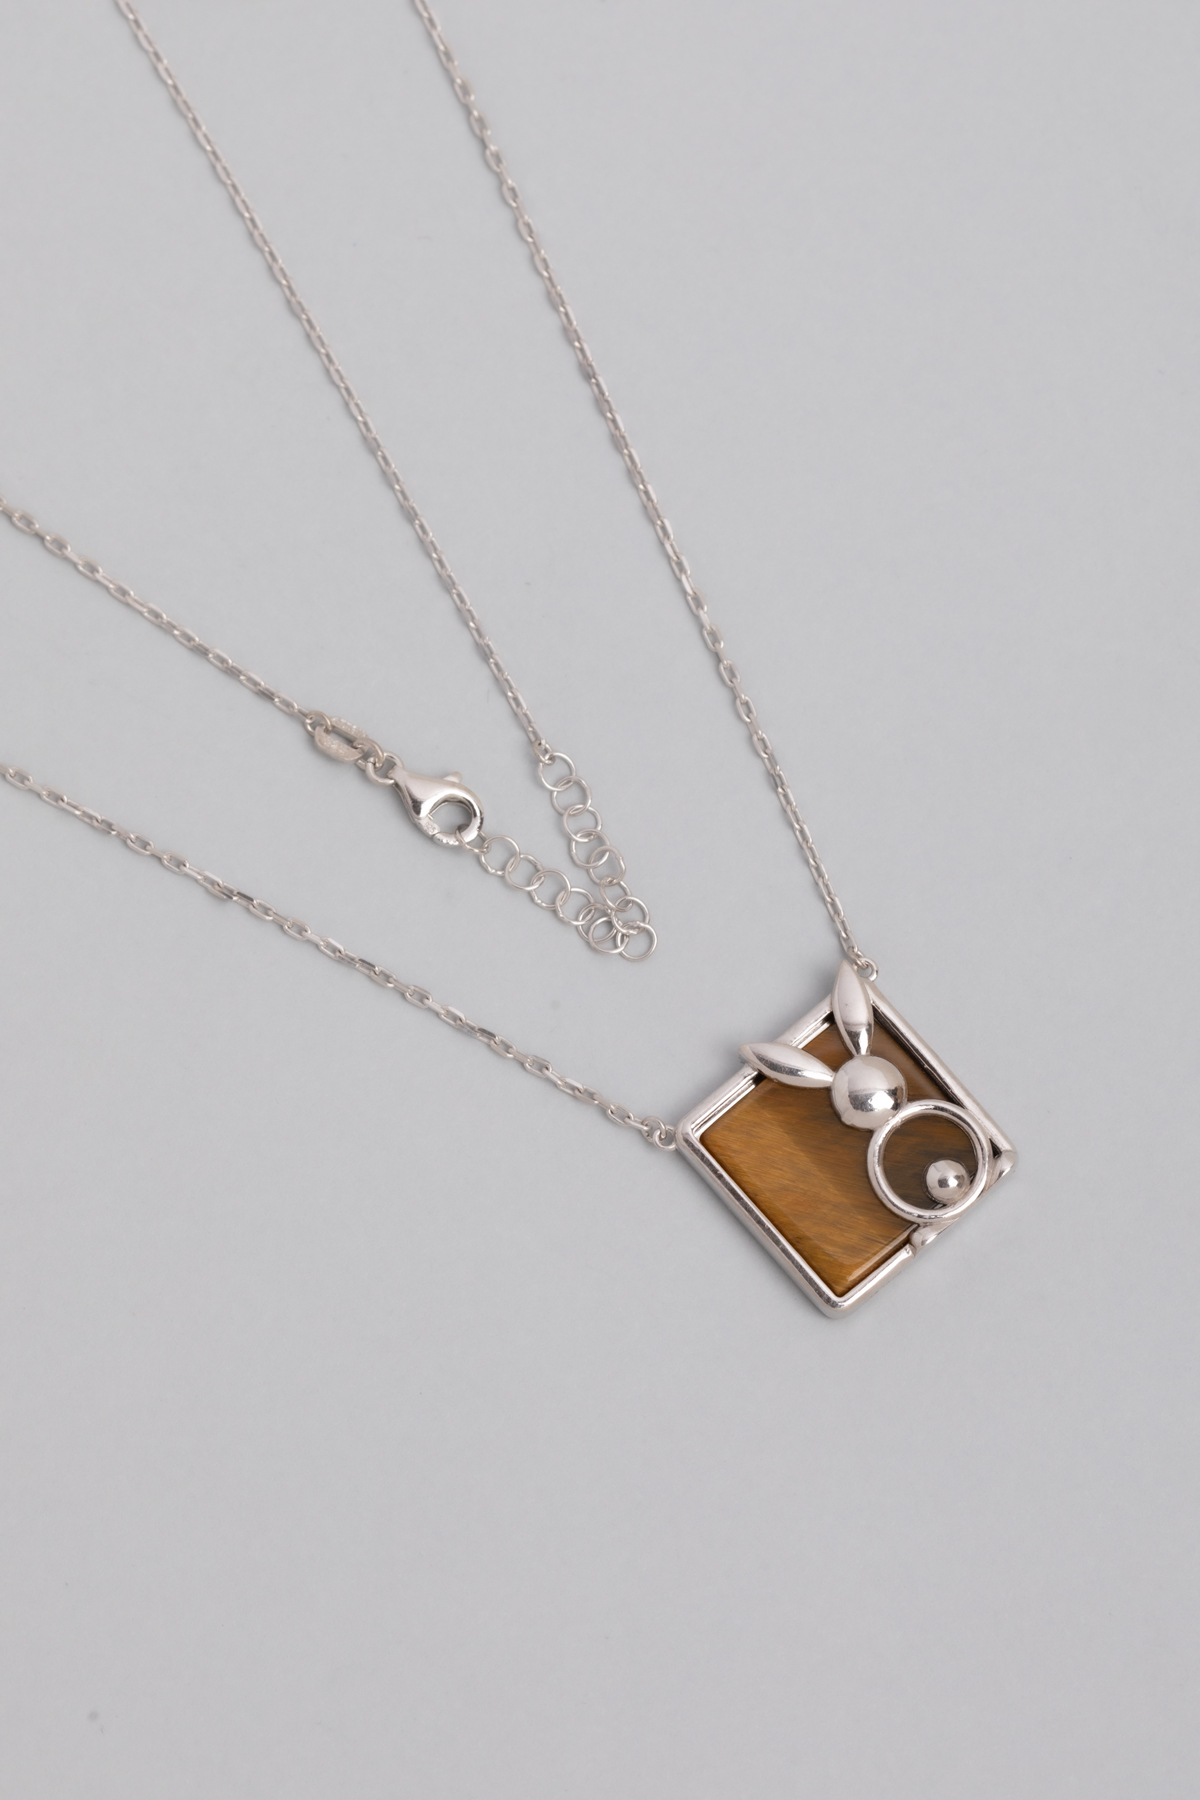 18K White Gold Plated Silver Rabbit Necklace with Tiger Eye Stone